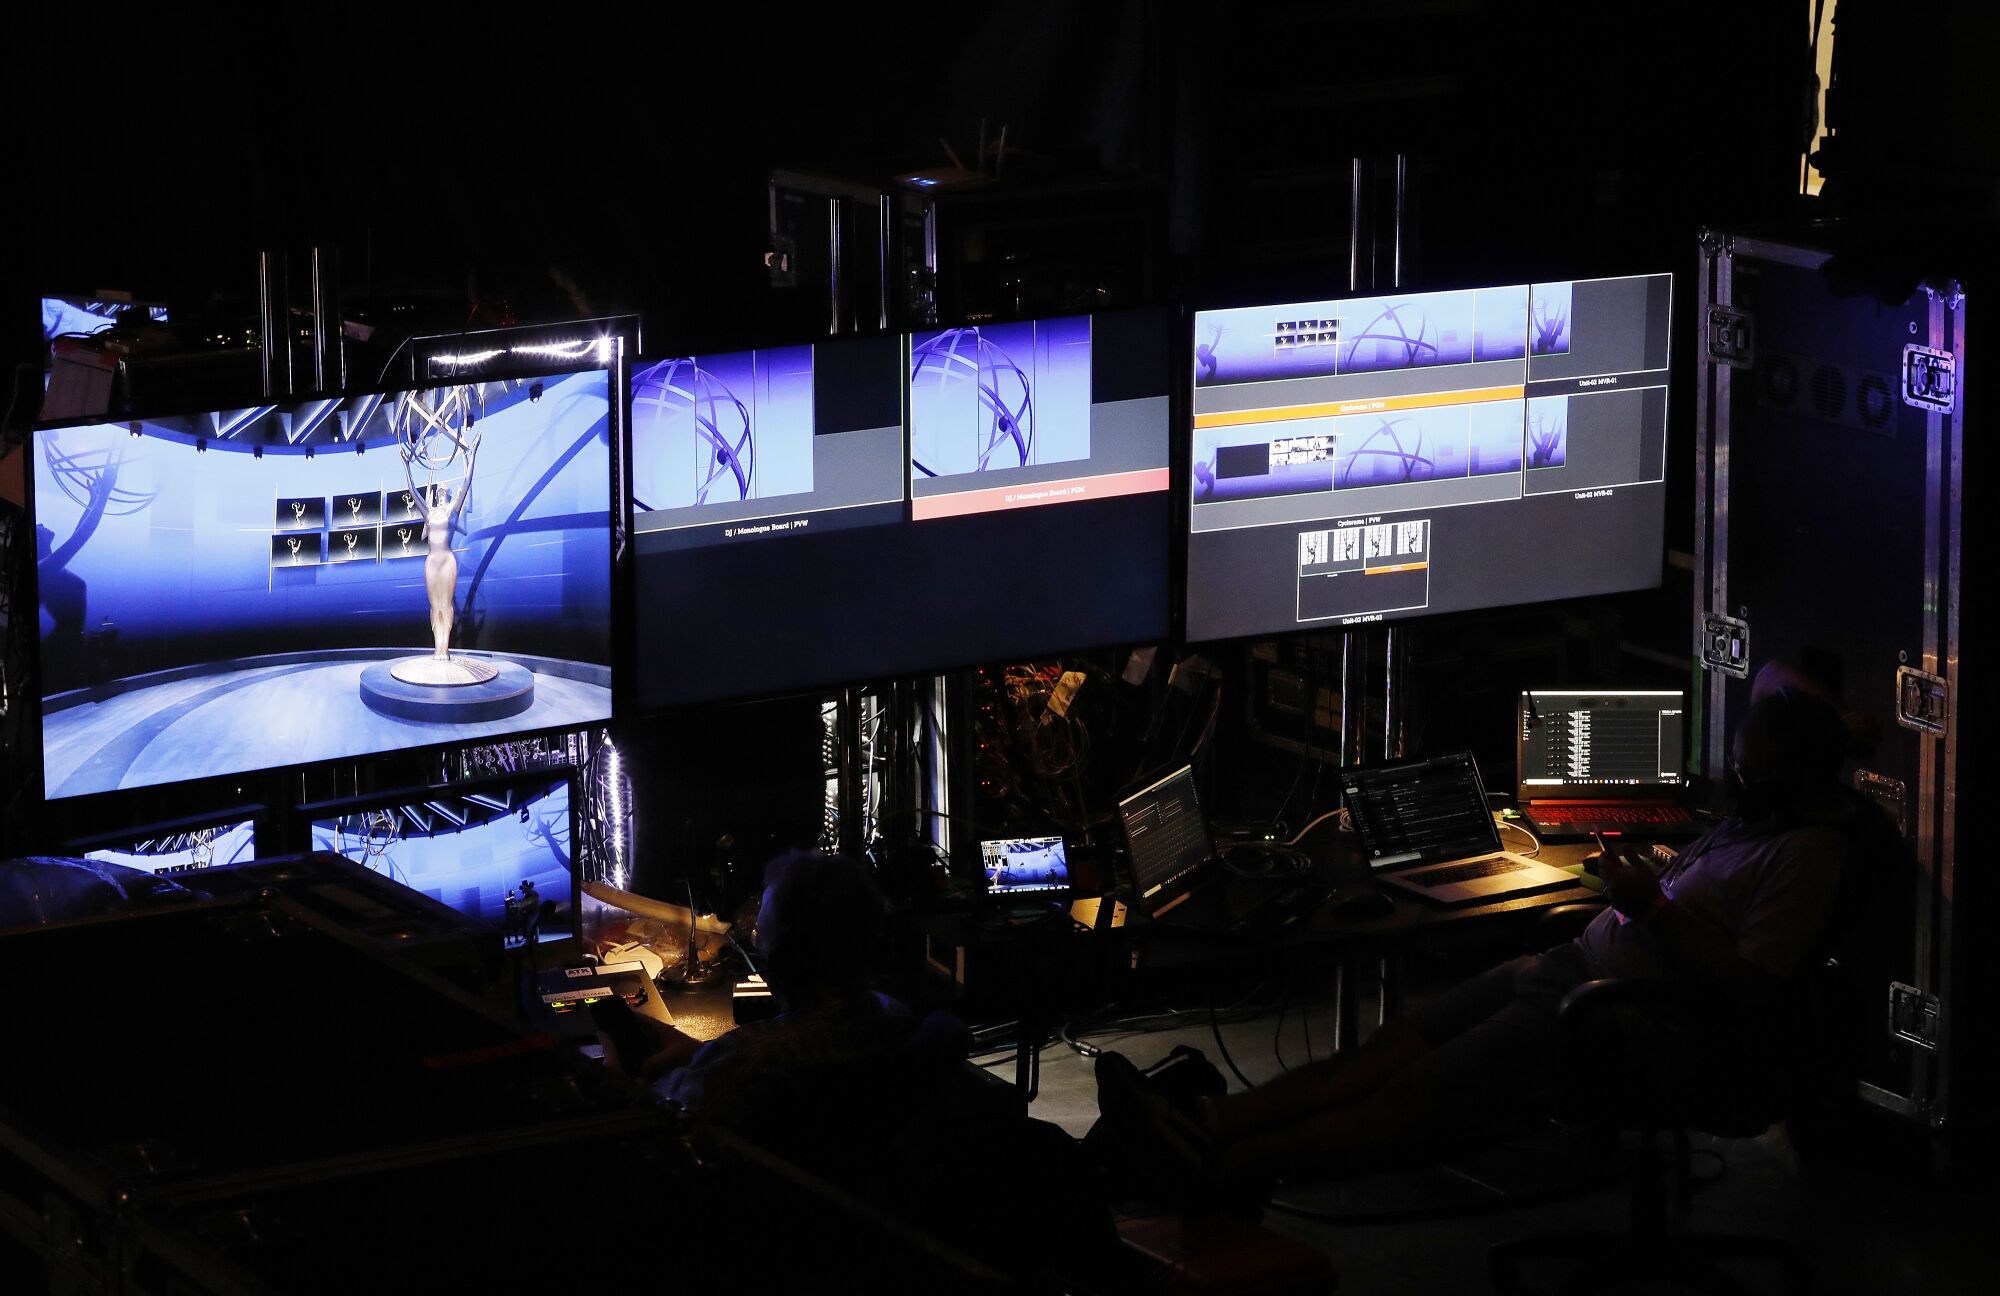 Giant monitors are at the nerve center of production on the floor of Staples Center.